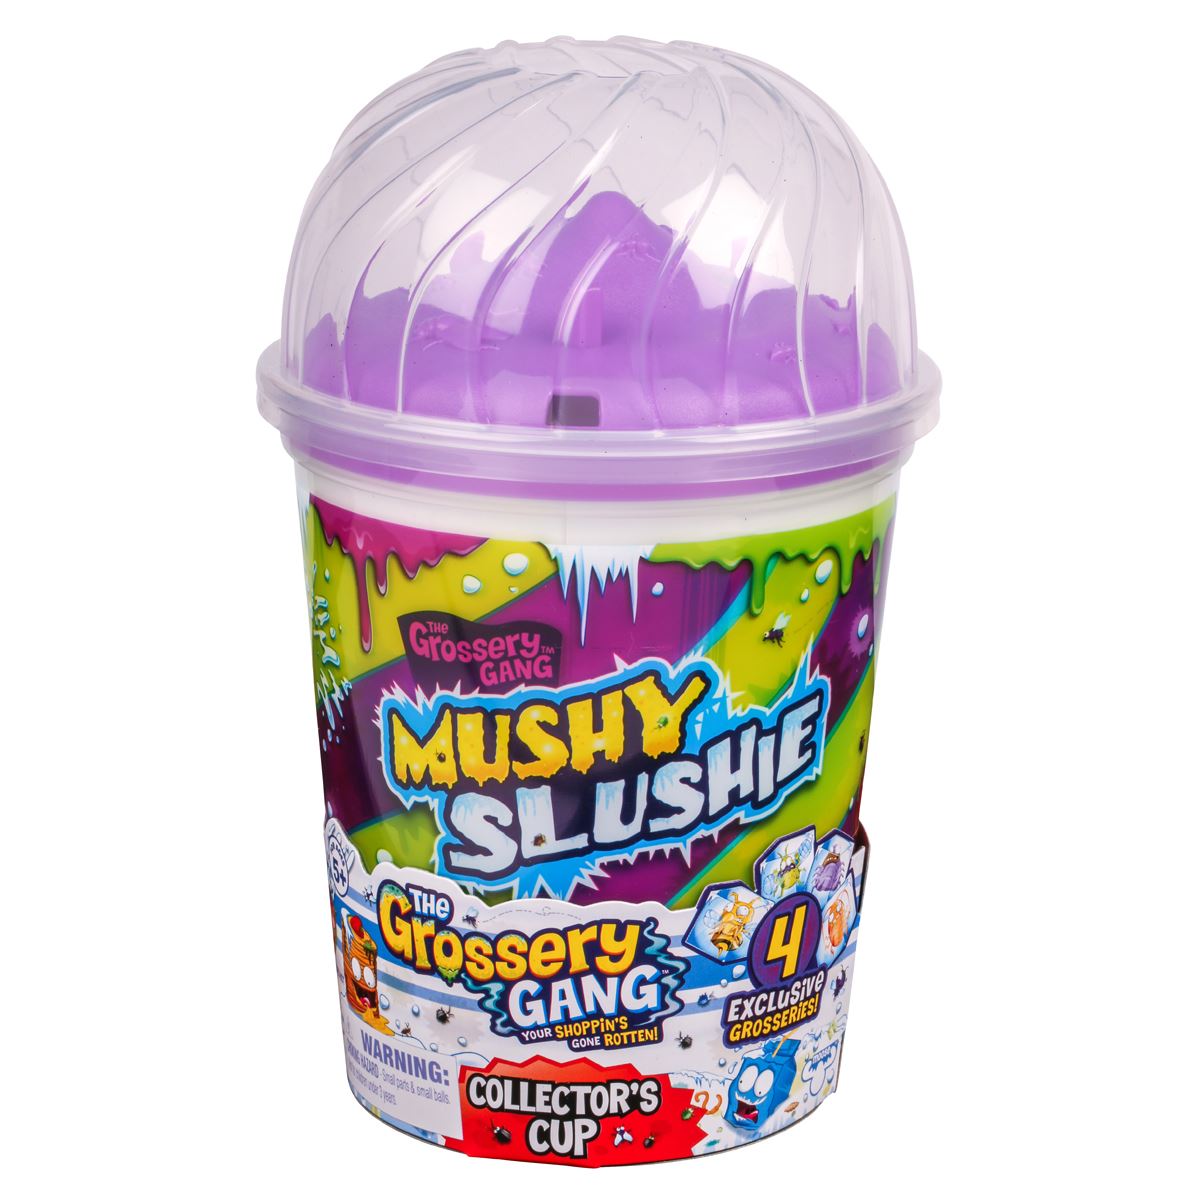 The Grossery Gang Mushy Slushie Collectors Cup